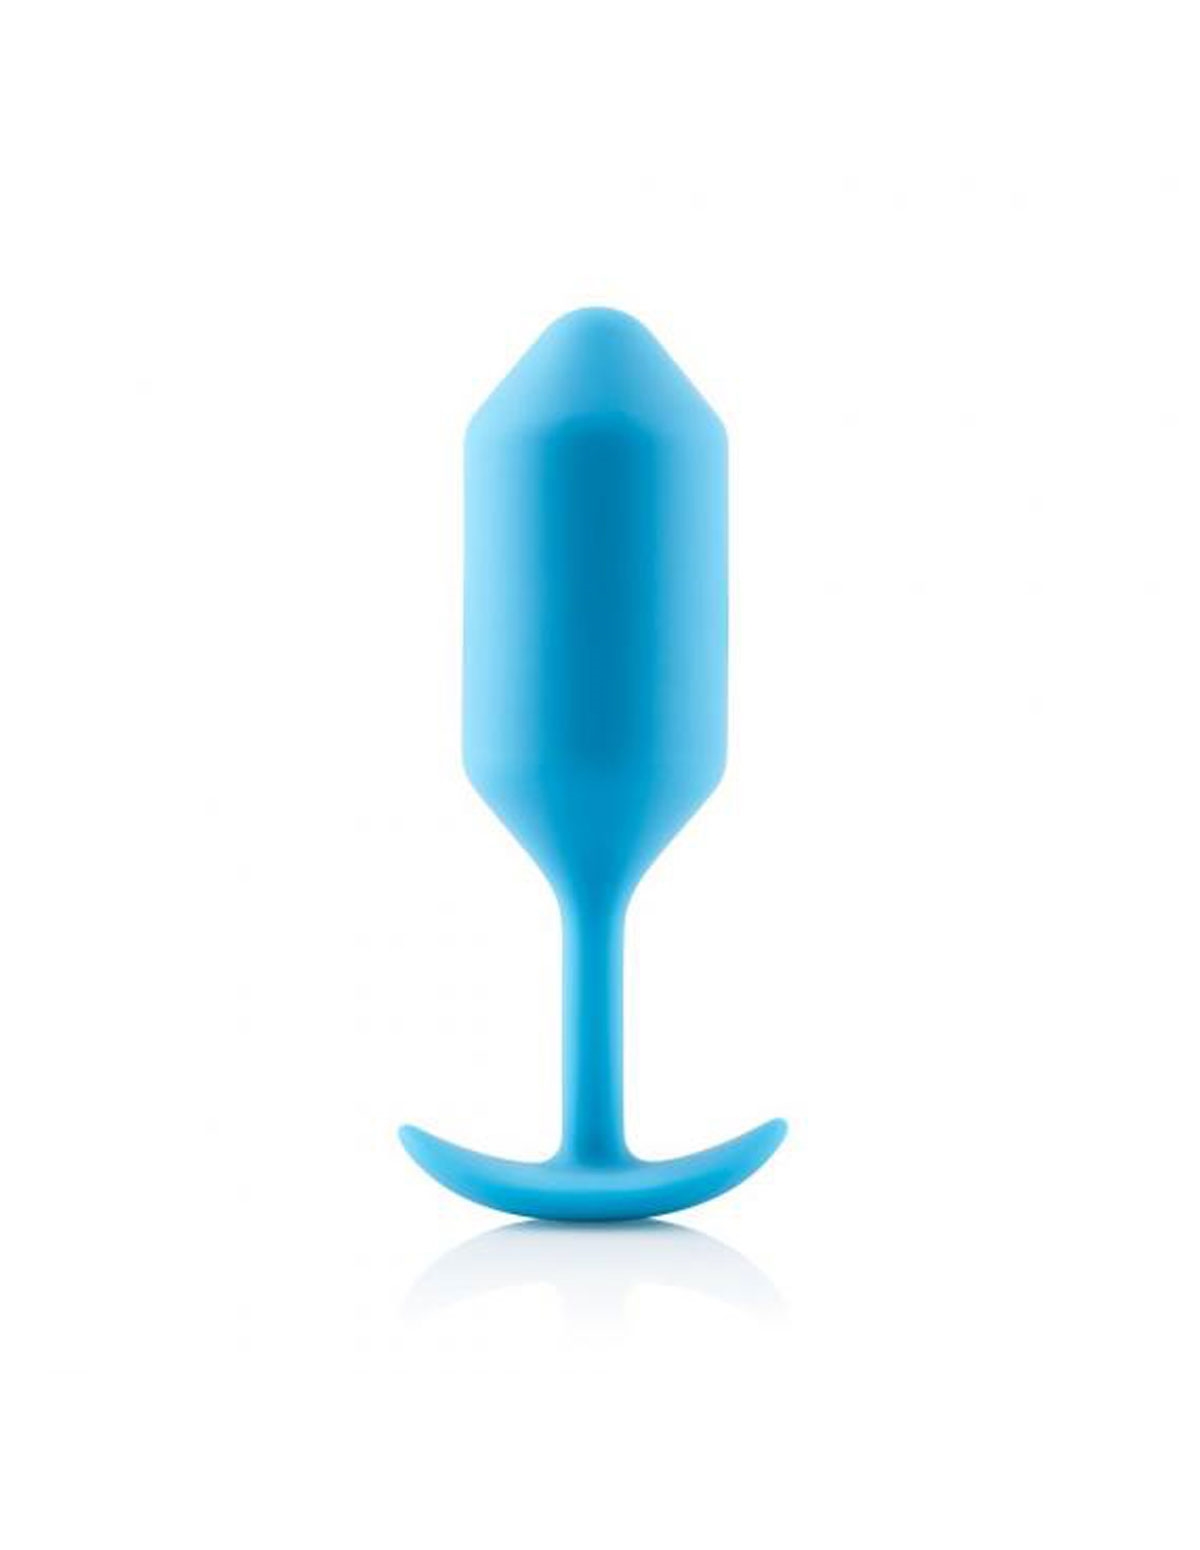 alternate image for Snug Plug 3 Weighted Silicone Butt Plug